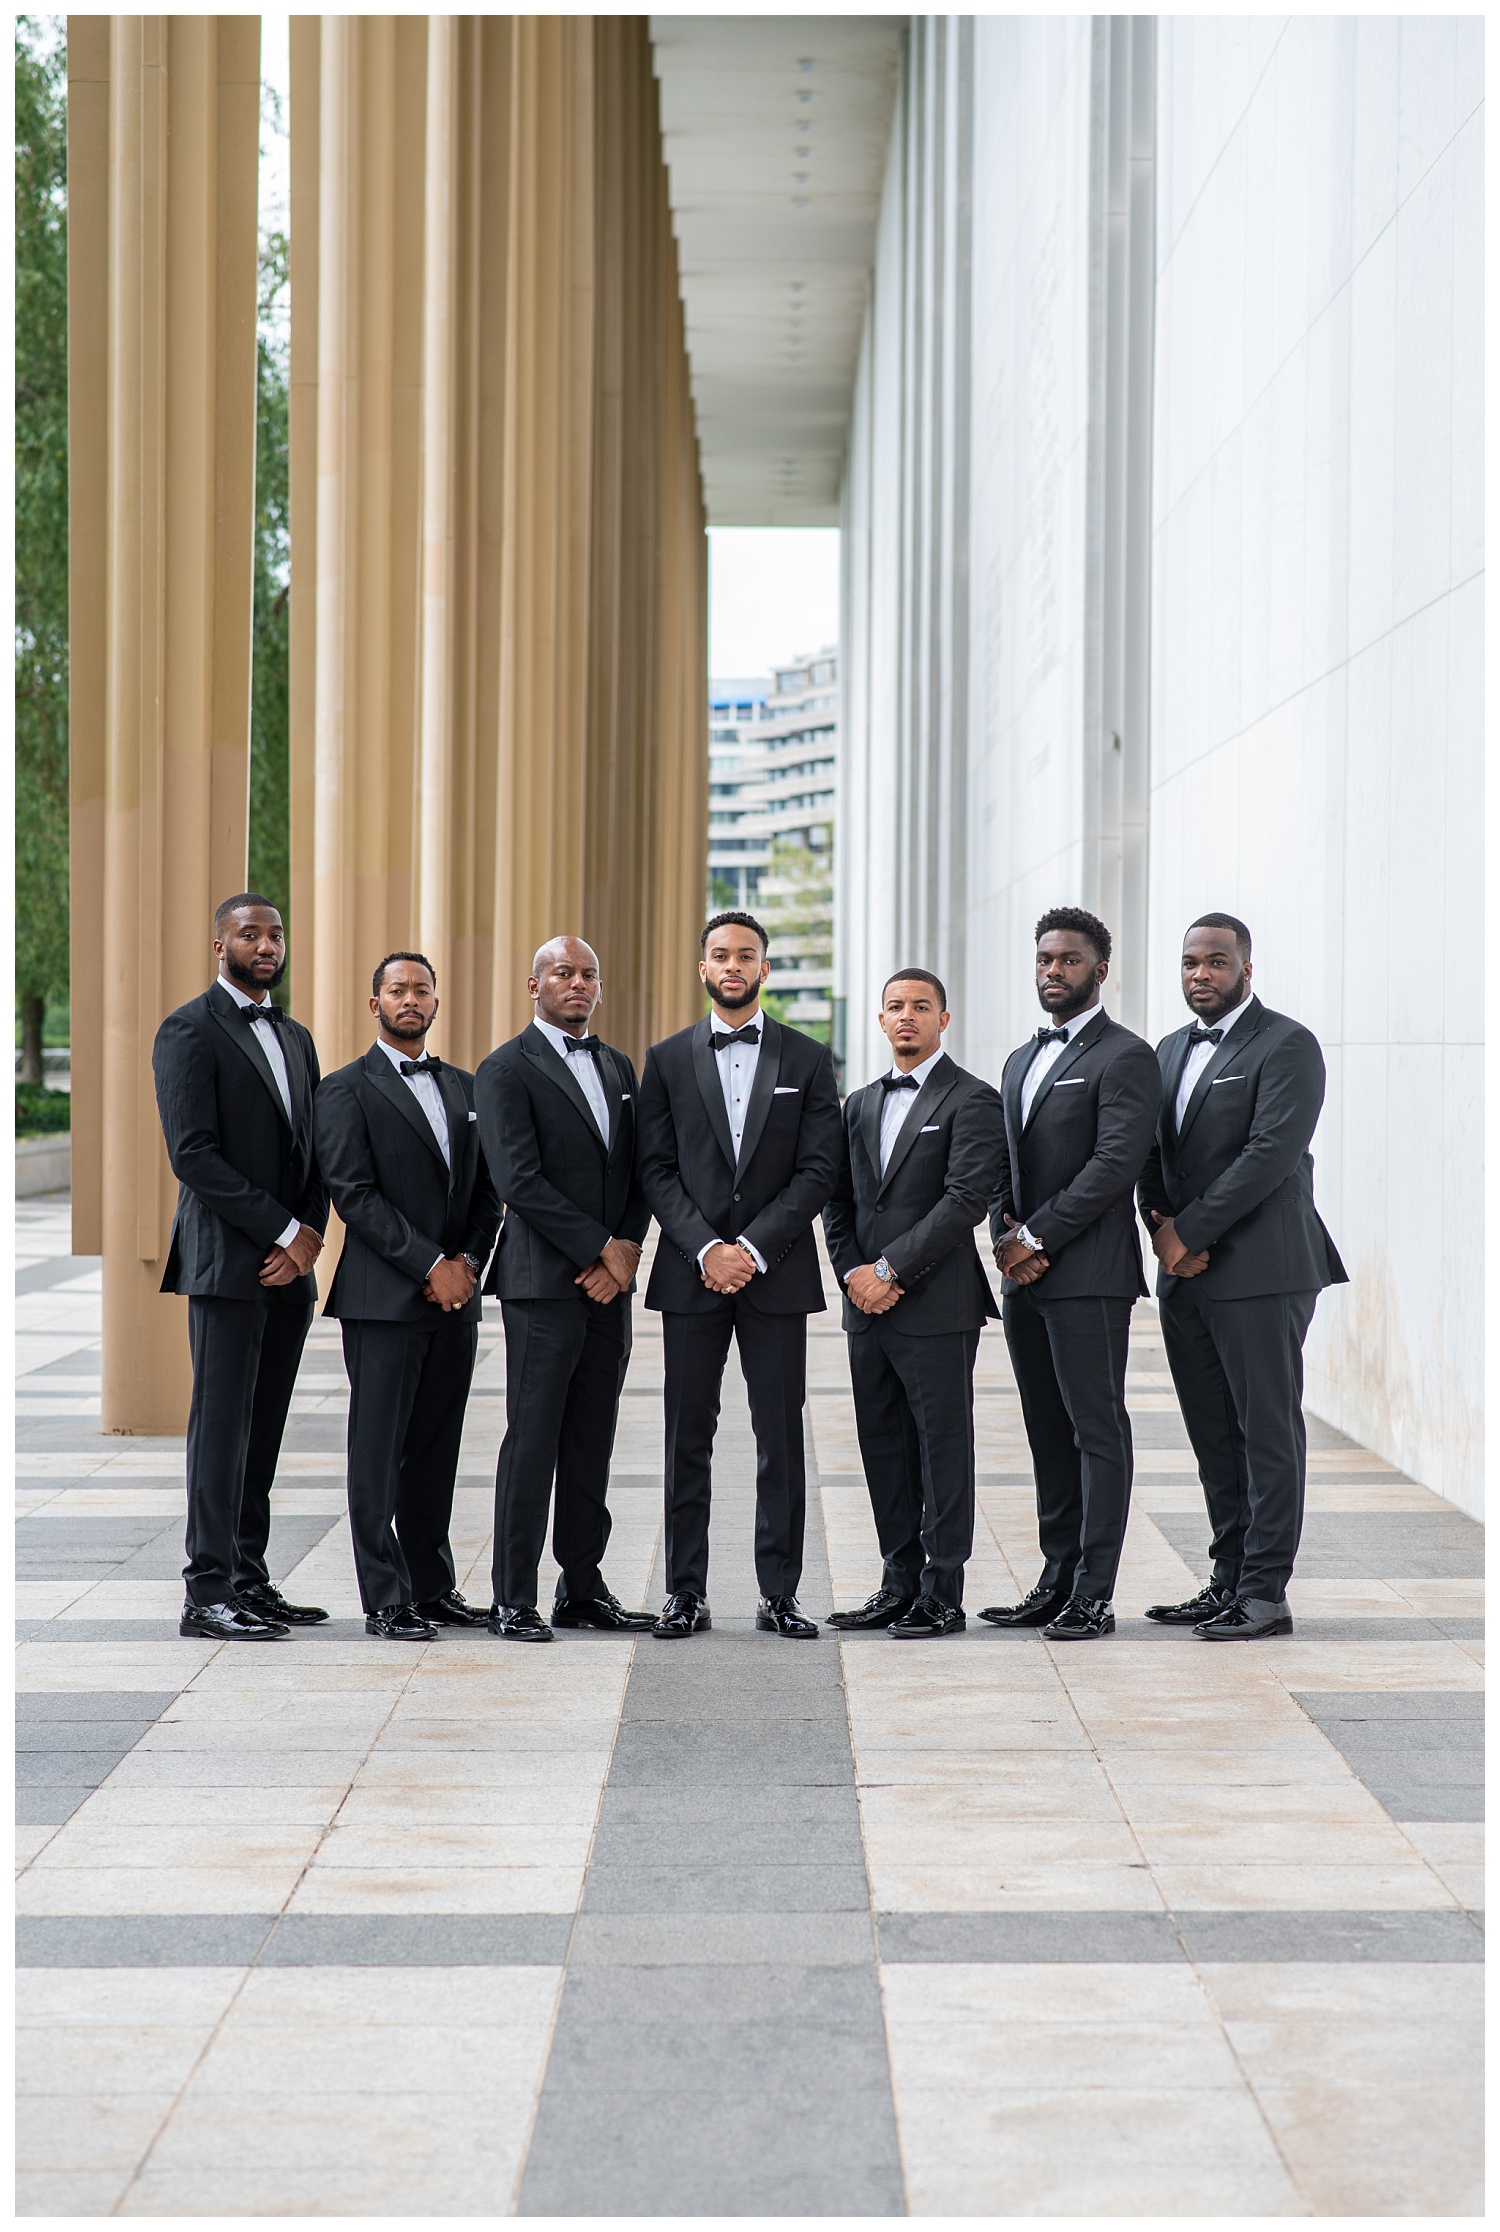 grooms and groomsmen posing together outside in Washington, D.C.